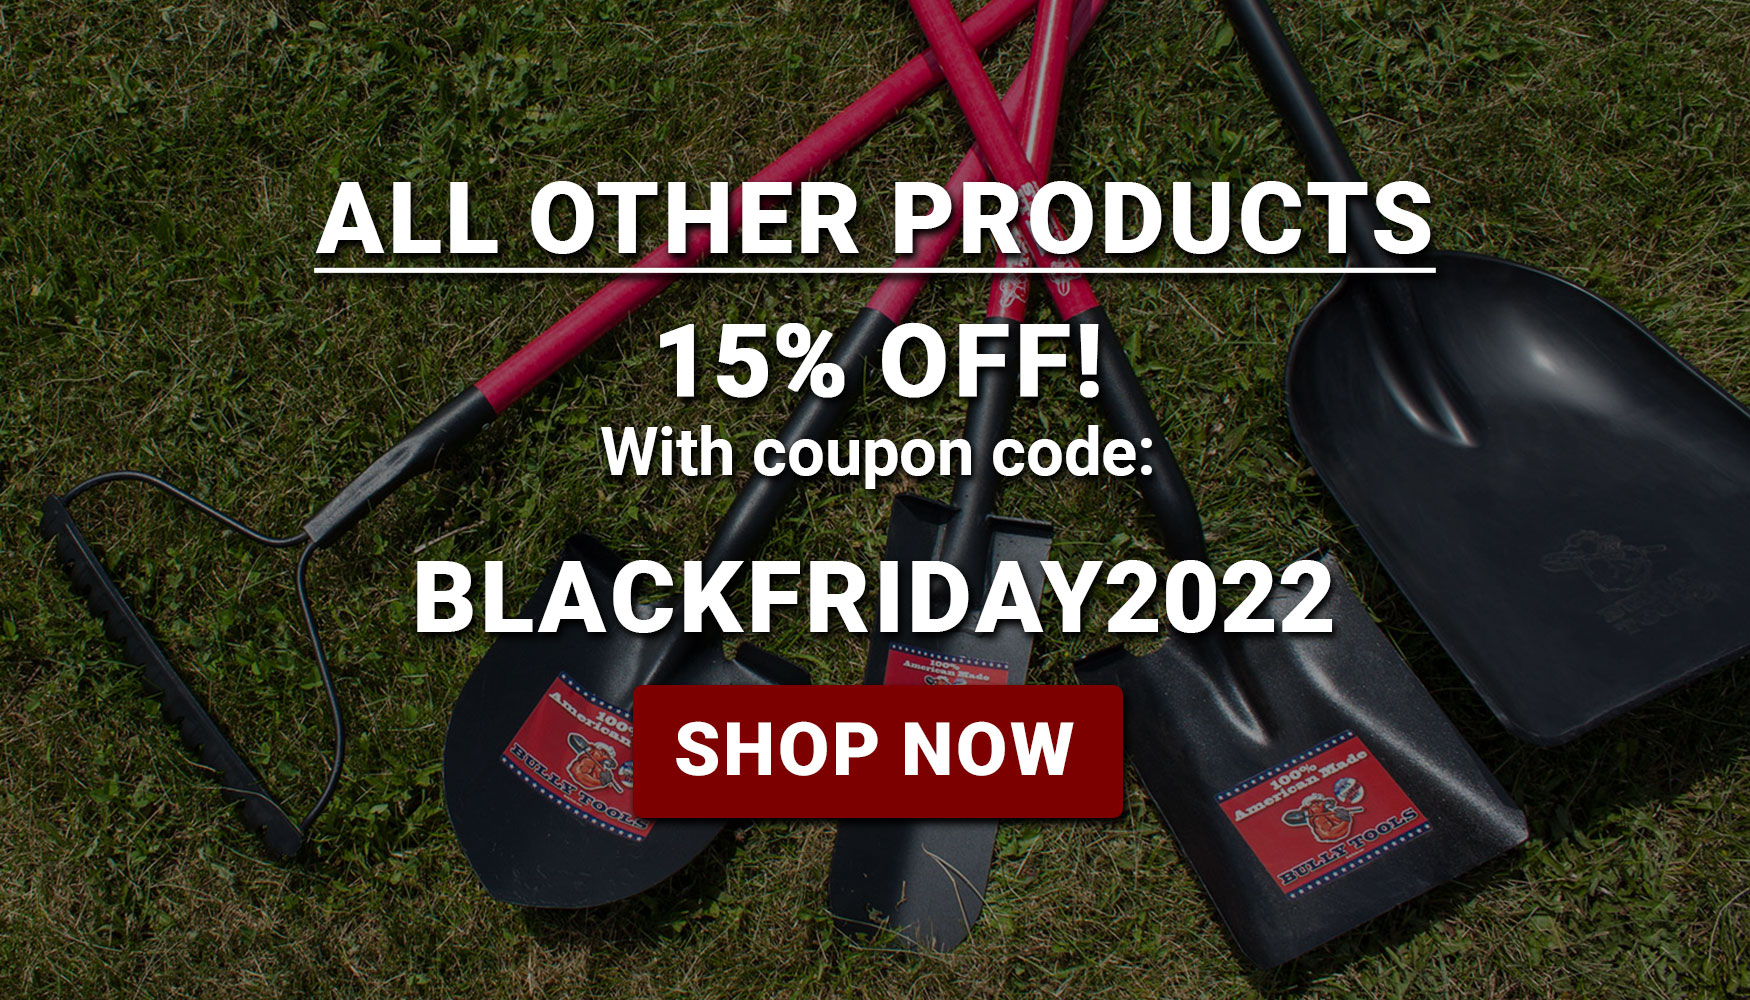 Black Friday 2022 all products coupon